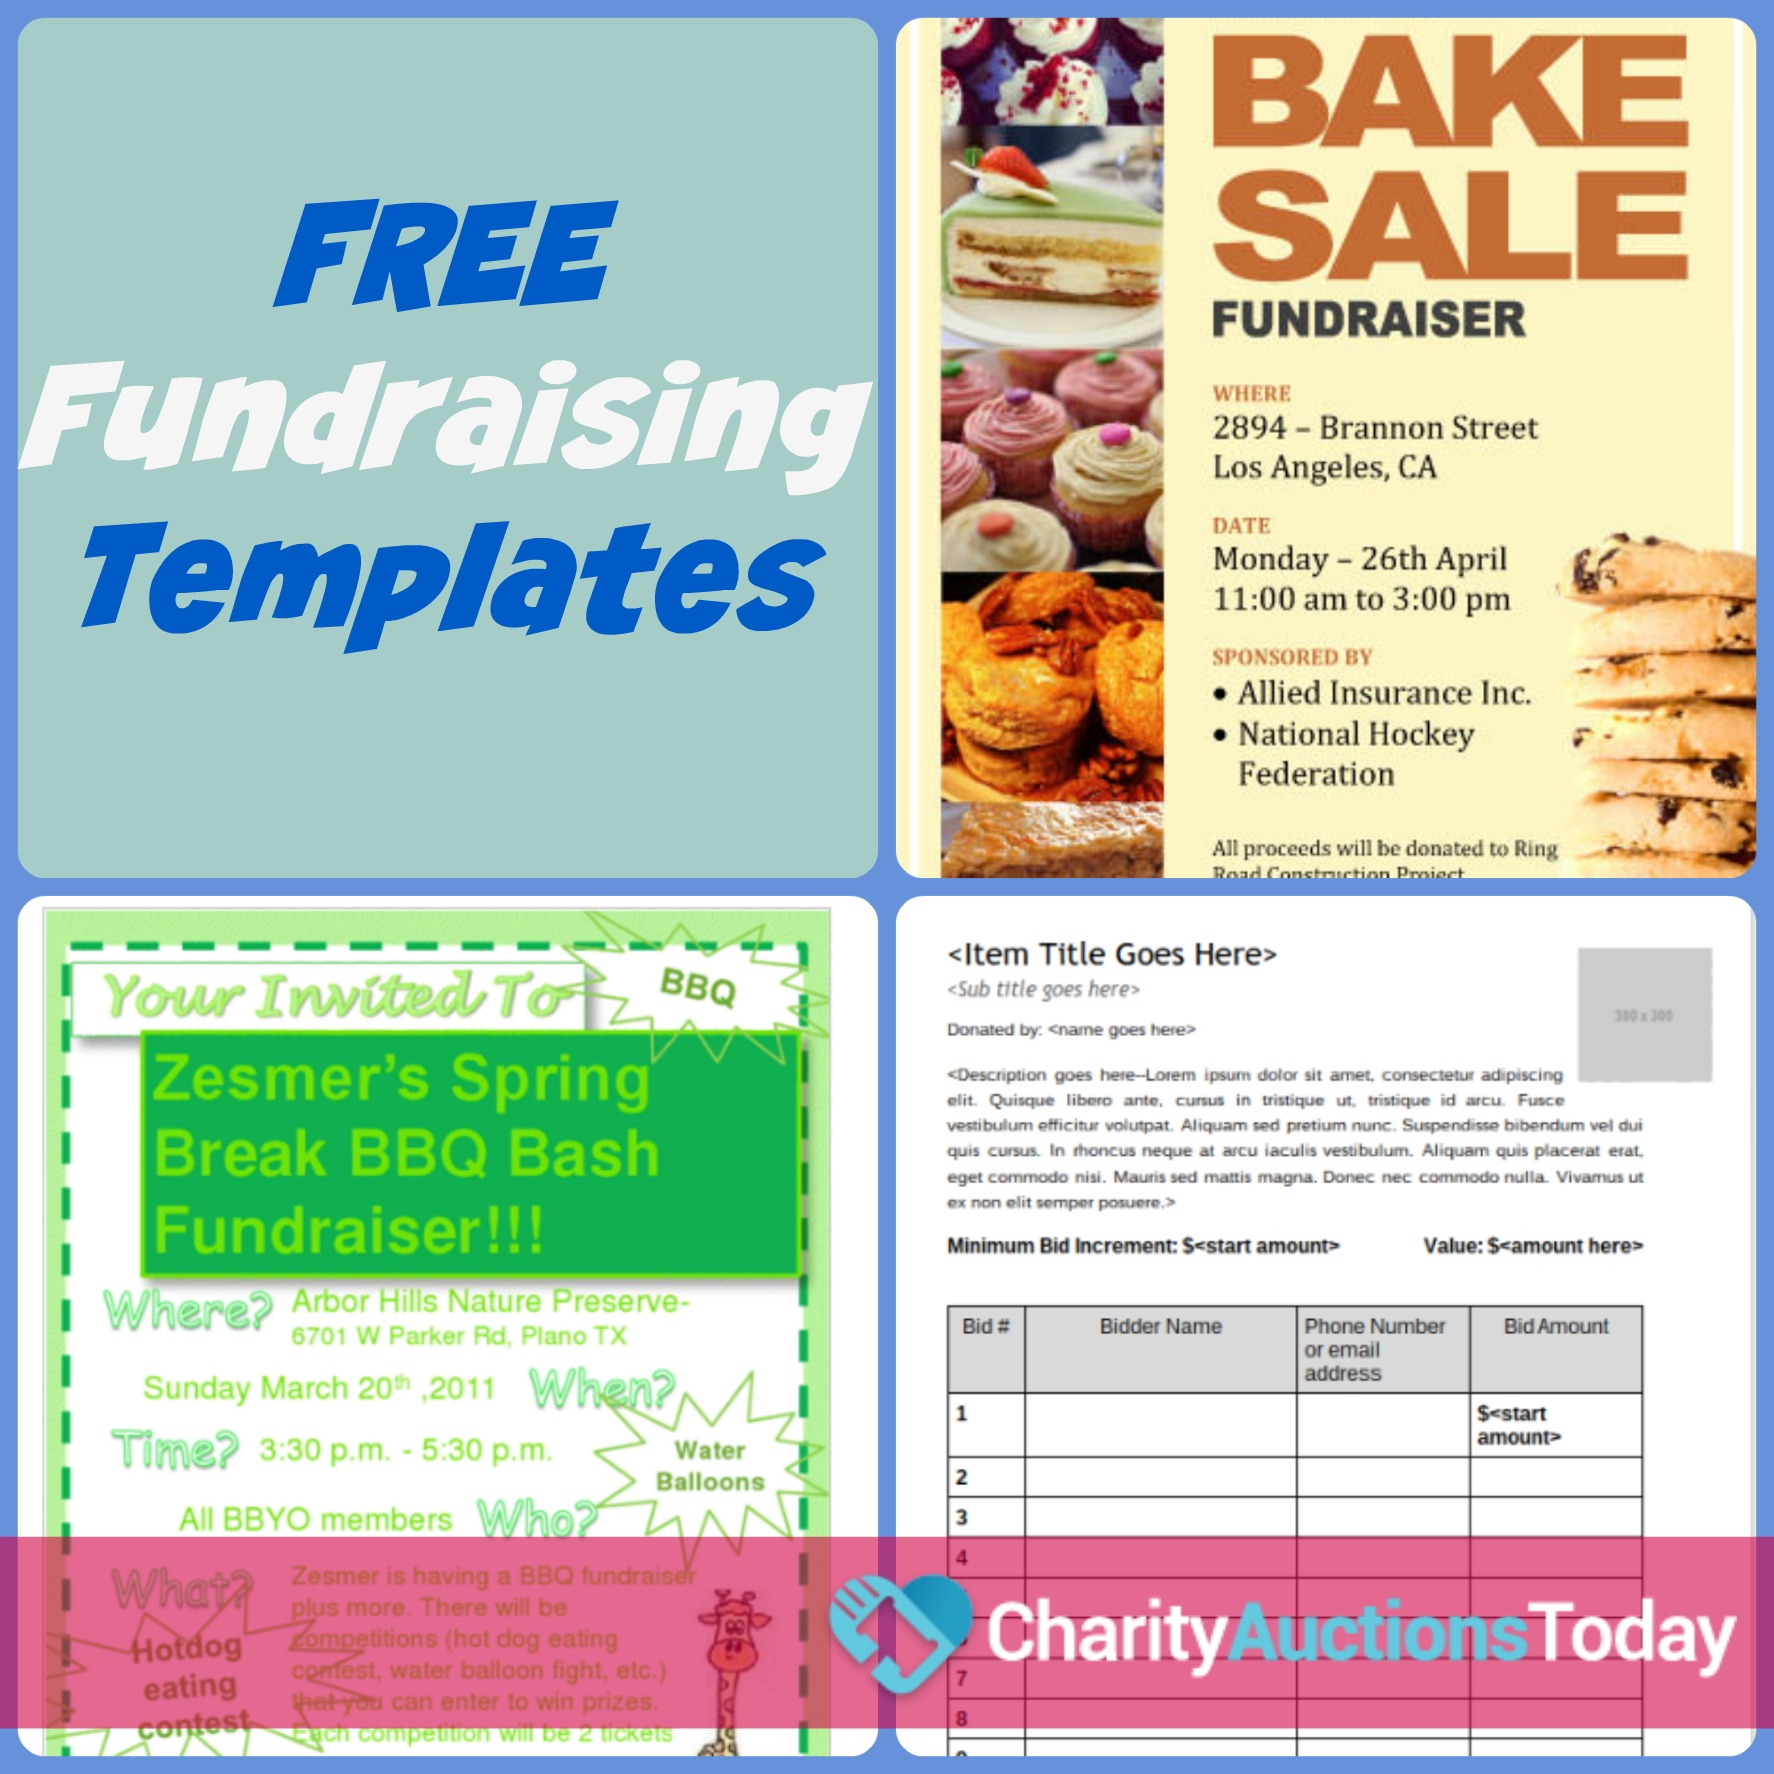 Free Fundraiser Flyer | Charity Auctions Today - Free Printable Flyer Templates